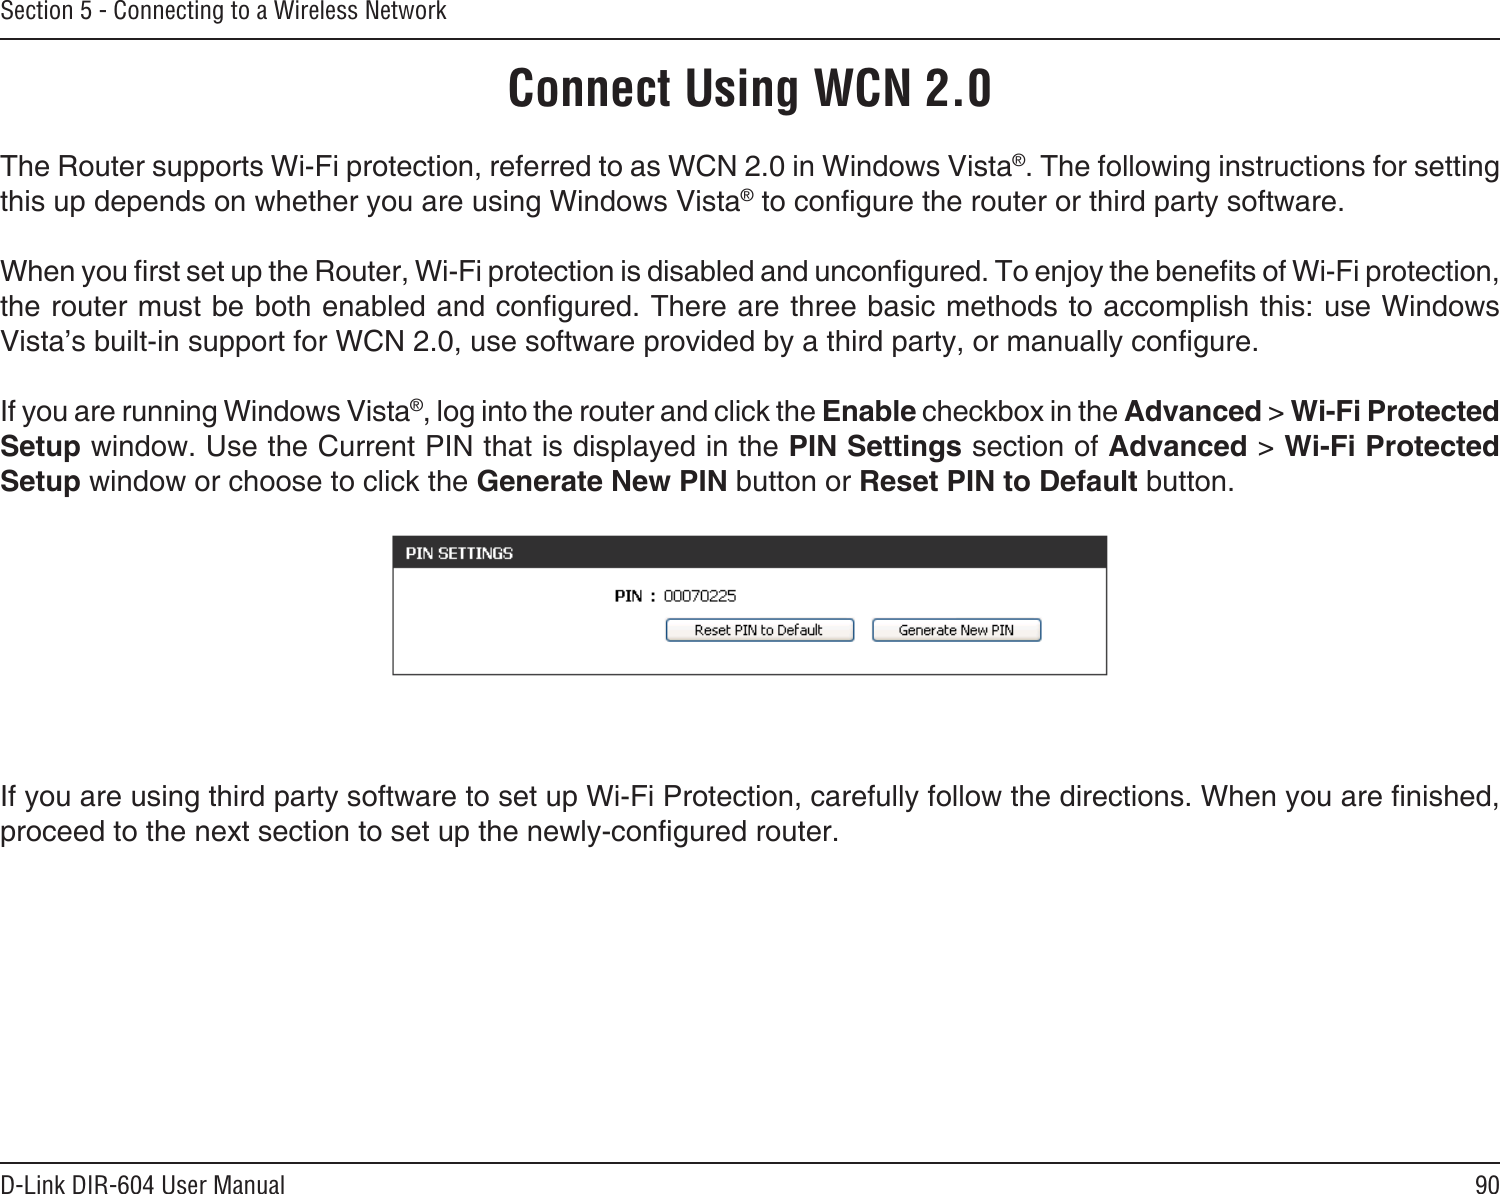 90D-Link DIR-604 User ManualSection 5 - Connecting to a Wireless NetworkConnect Using WCN 2.0The Router supports Wi-Fi protection, referred to as WCN 2.0 in Windows Vista®. The following instructions for setting this up depends on whether you are using Windows Vista® to congure the router or third party software.        When you rst set up the Router, Wi-Fi protection is disabled and uncongured. To enjoy the benets of Wi-Fi protection, the router must be both enabled and congured. There are three basic methods to accomplish this: use Windows Vista’s built-in support for WCN 2.0, use software provided by a third party, or manually congure. If you are running Windows Vista®, log into the router and click the Enable checkbox in the Advanced &gt; Wi-Fi Protected Setup window. Use the Current PIN that is displayed in the PIN Settings section of Advanced &gt; Wi-Fi Protected Setup window or choose to click the Generate New PIN button or Reset PIN to Default button. If you are using third party software to set up Wi-Fi Protection, carefully follow the directions. When you are nished, proceed to the next section to set up the newly-congured router. 